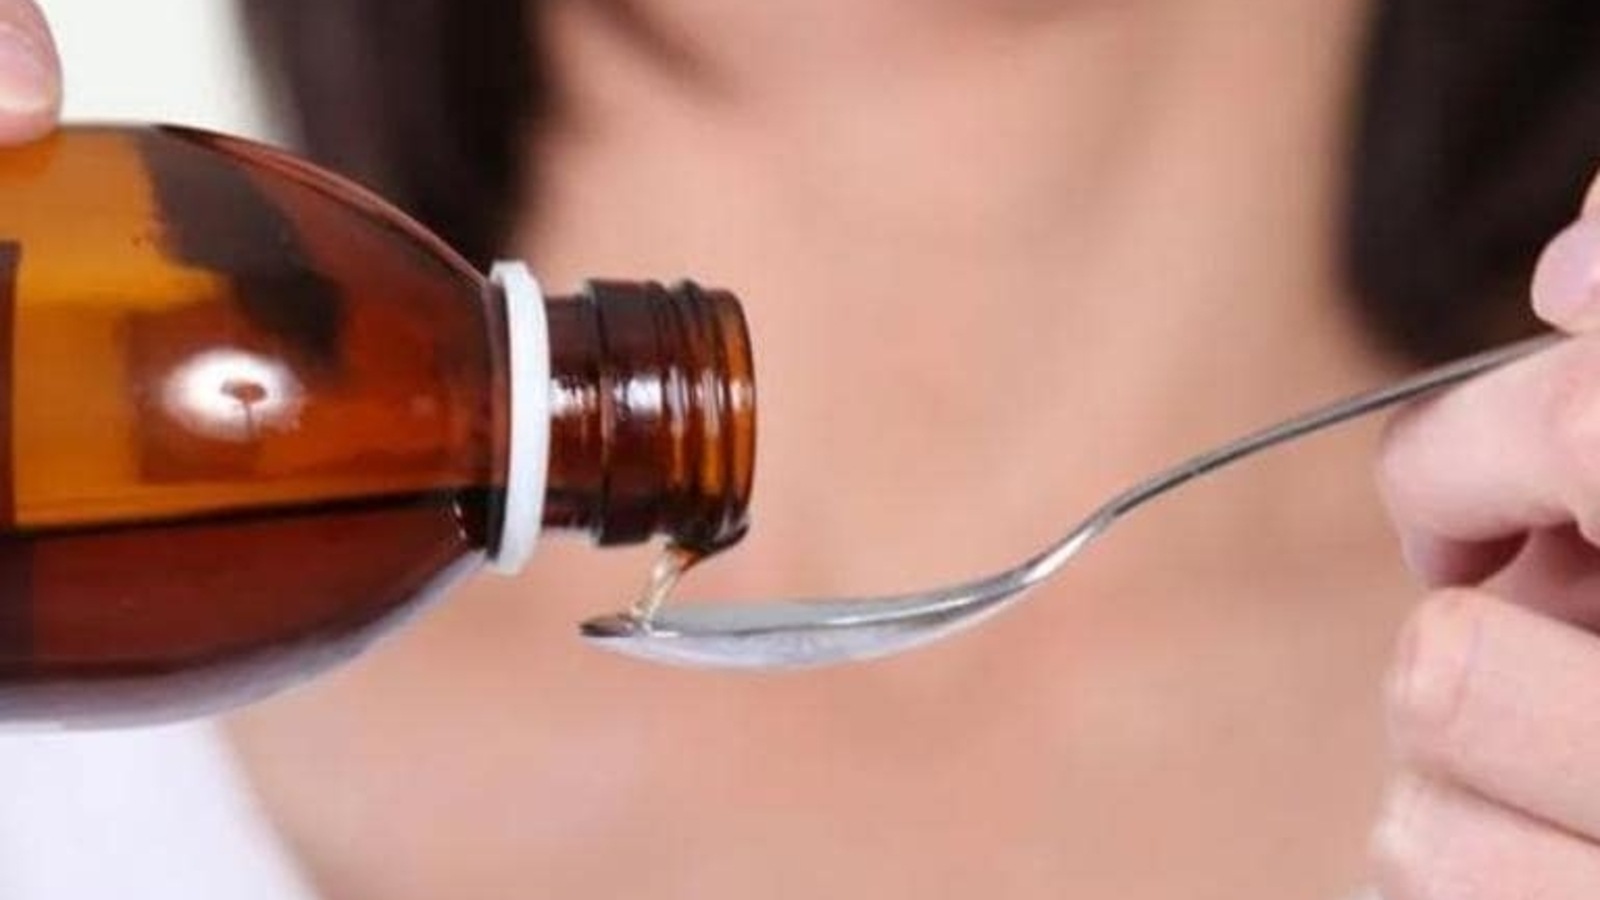 Cough syrup deaths: WHO probes Indian, Indonesian firms links - Report